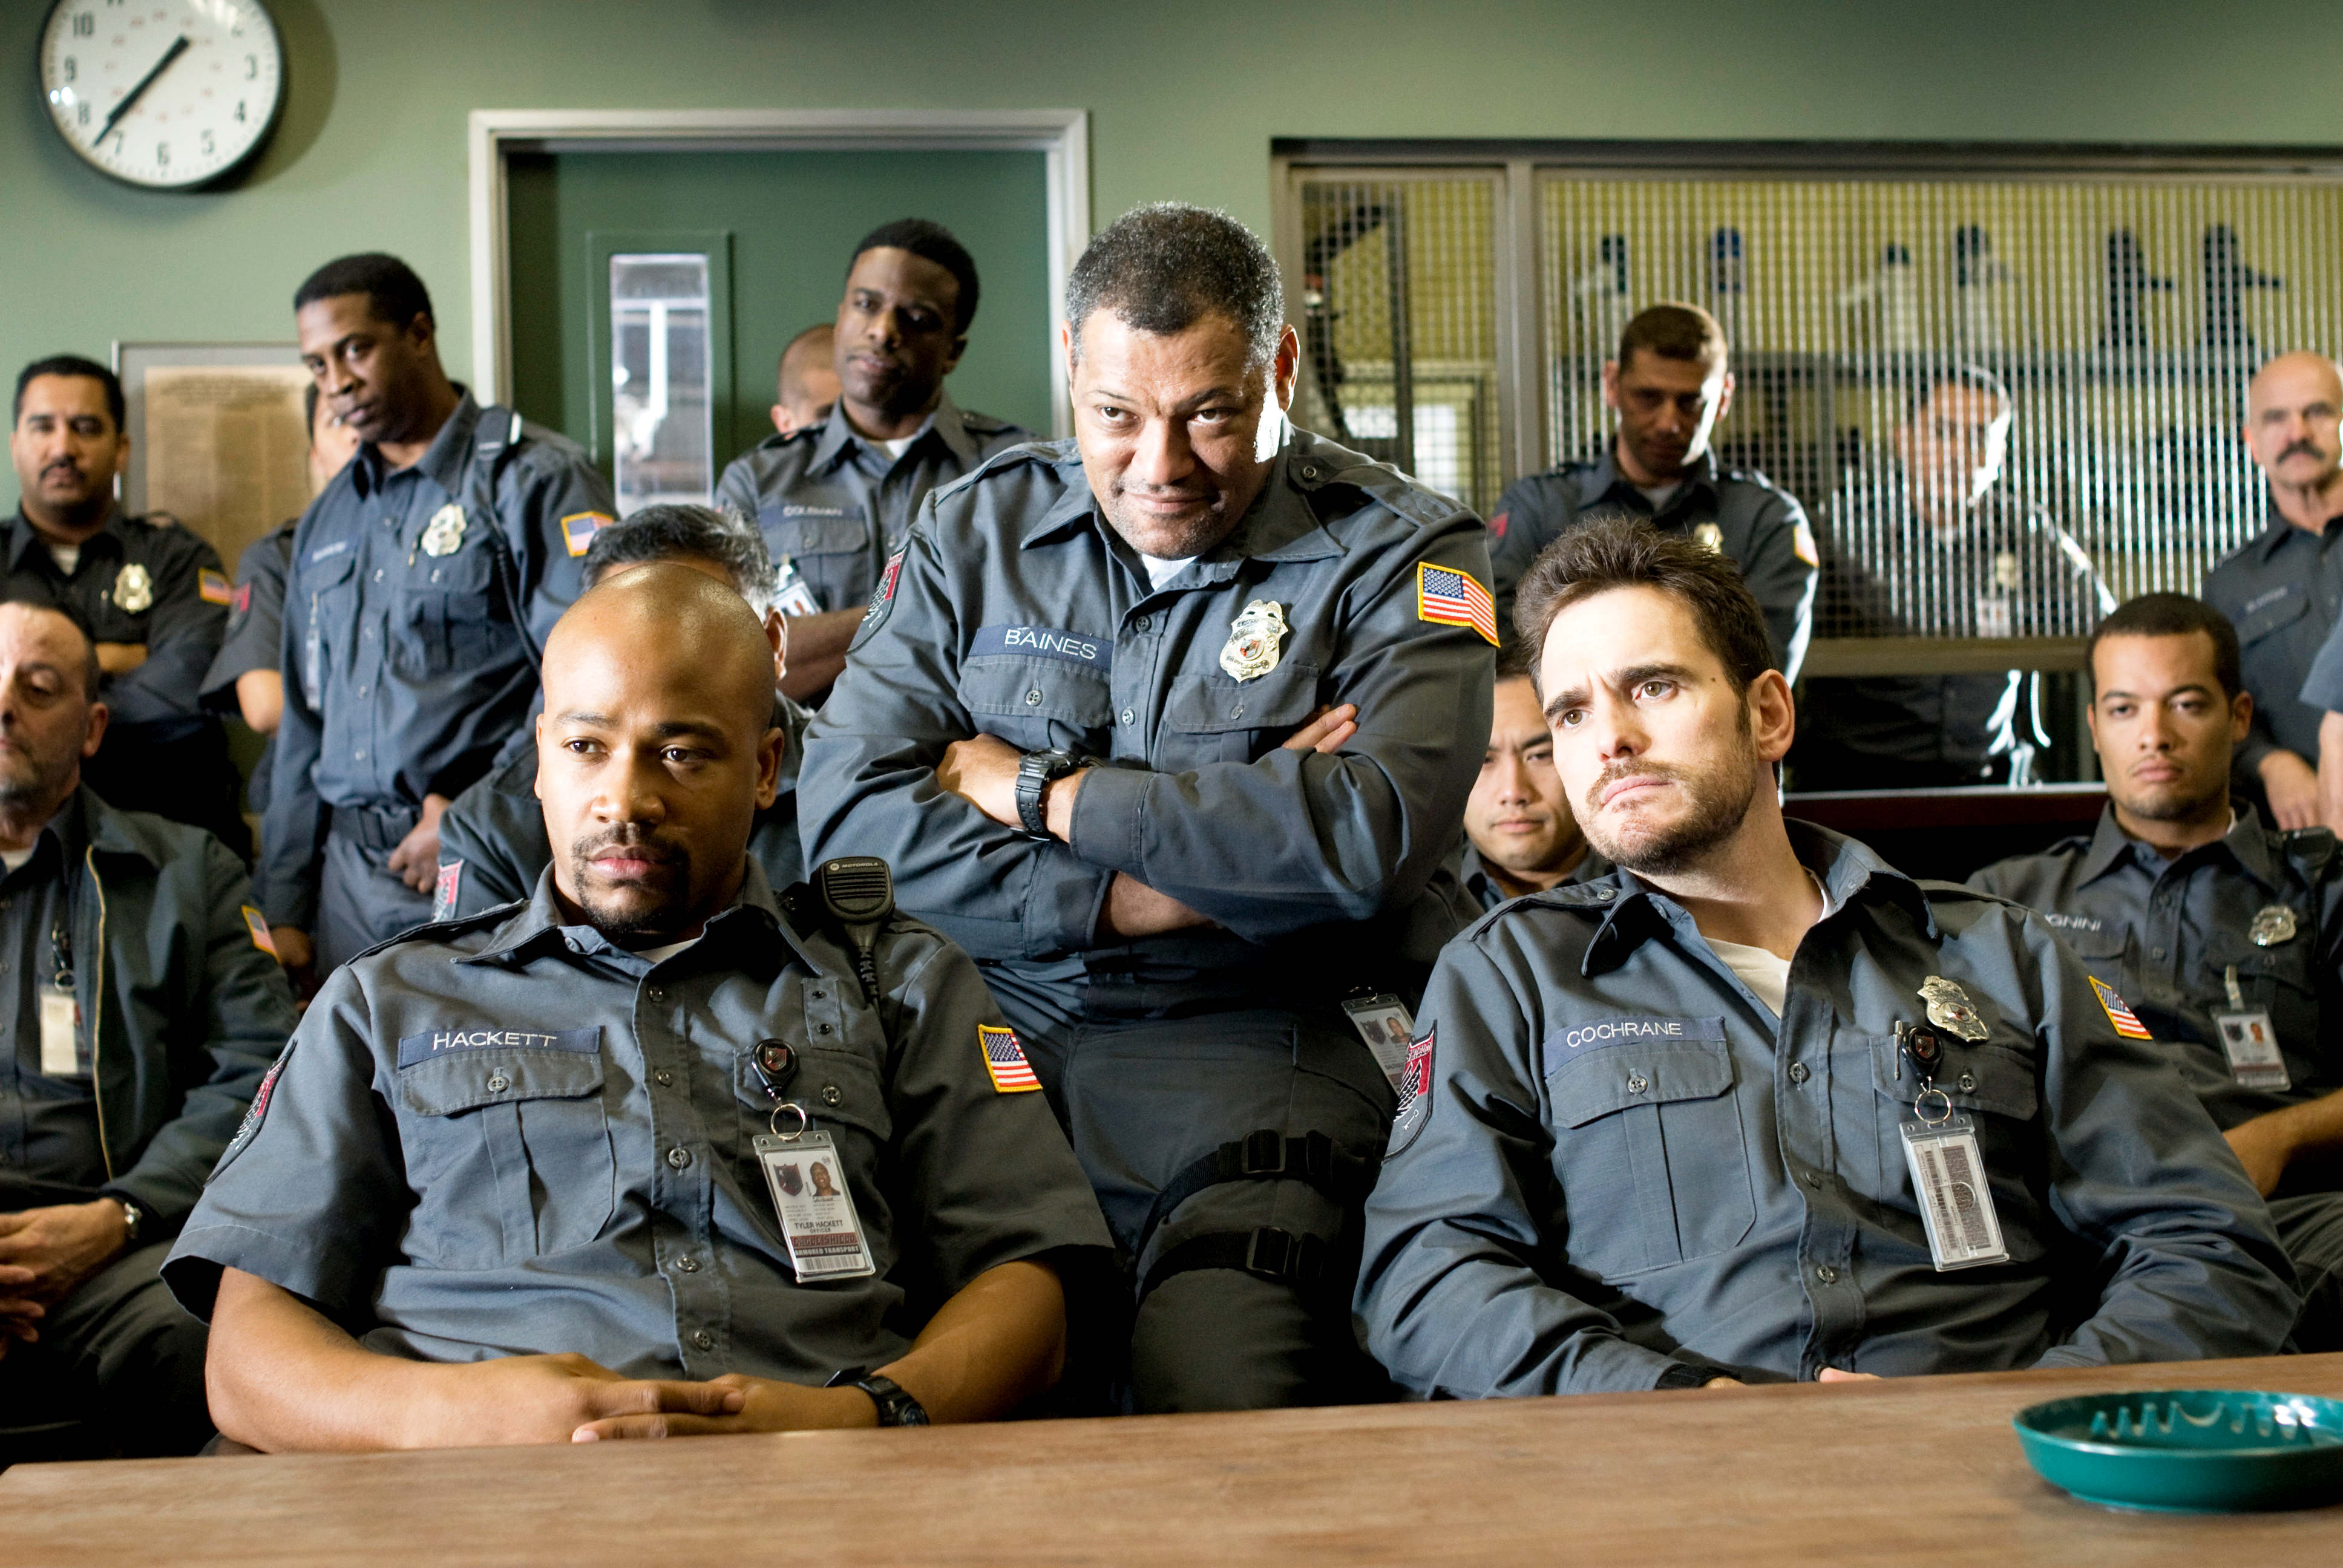 Columbus Short, Laurence Fishburne and Matt Dillon in Screen Gems' Armored (2009). Photo credit by Lacey Terrell.